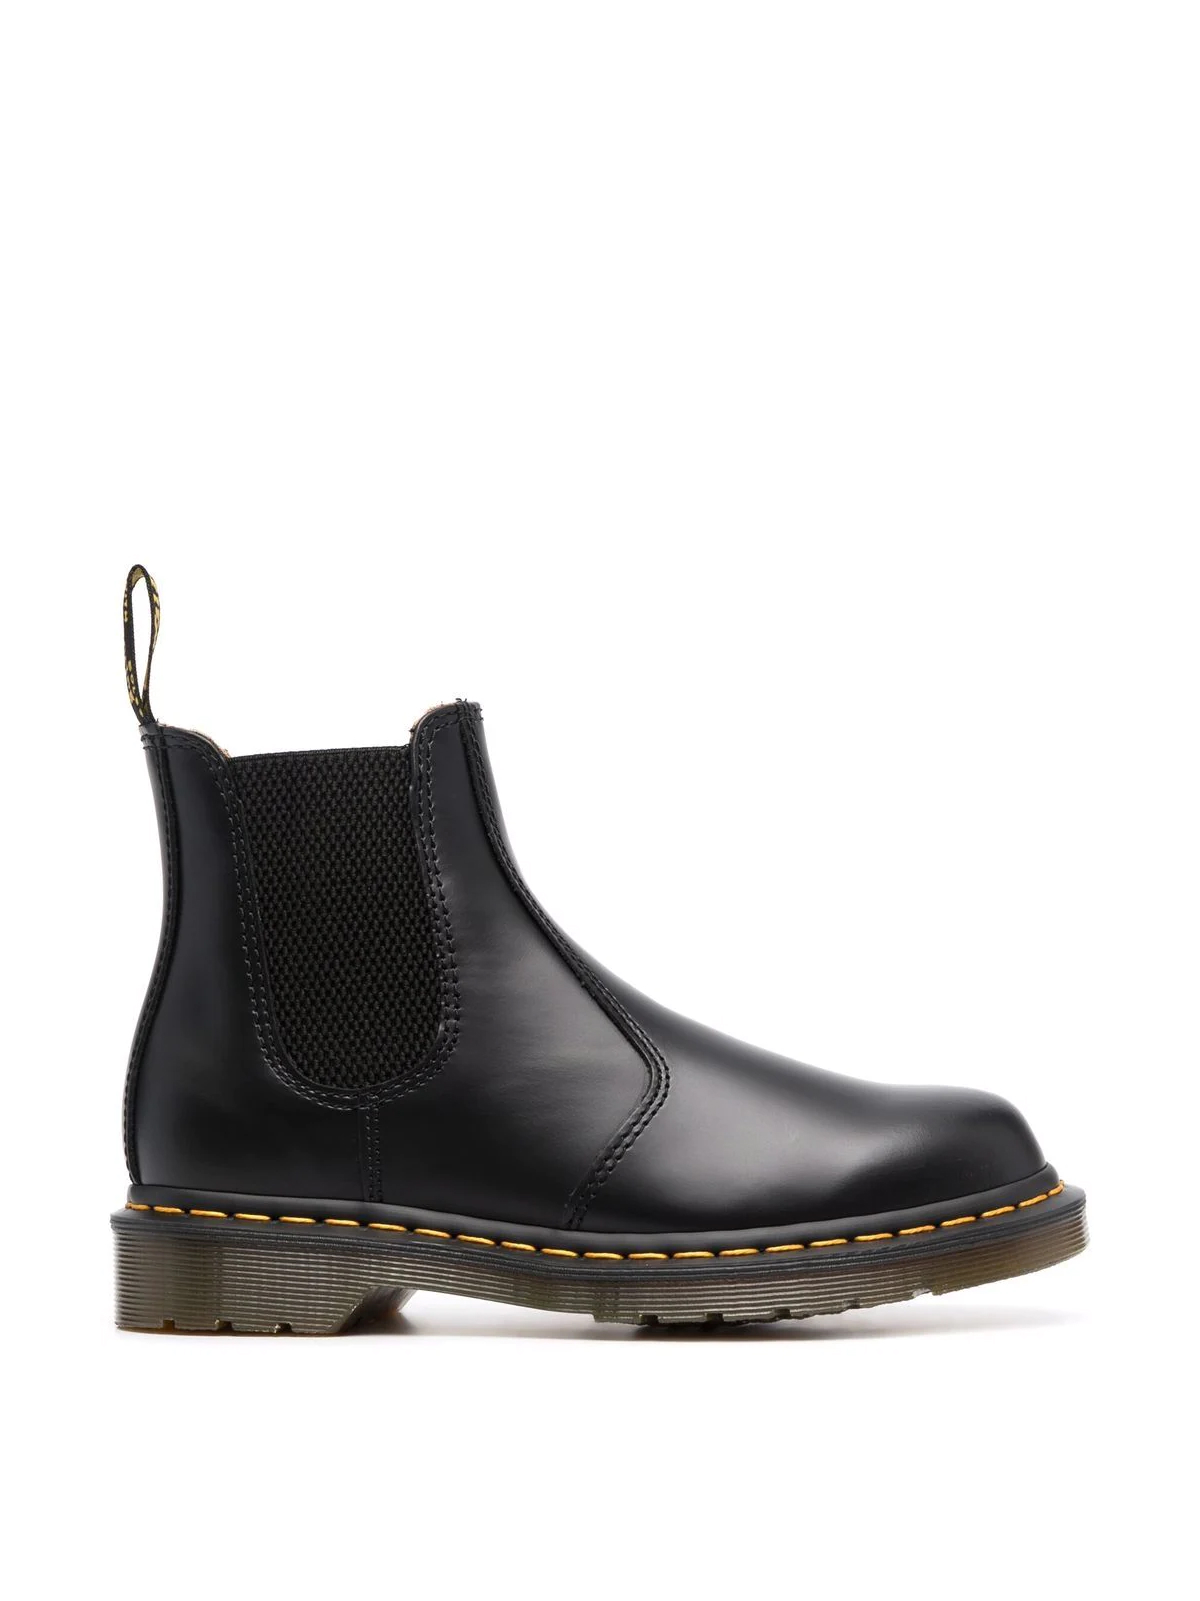 Dr. Martens 2976 Smooth Chelsea Boots